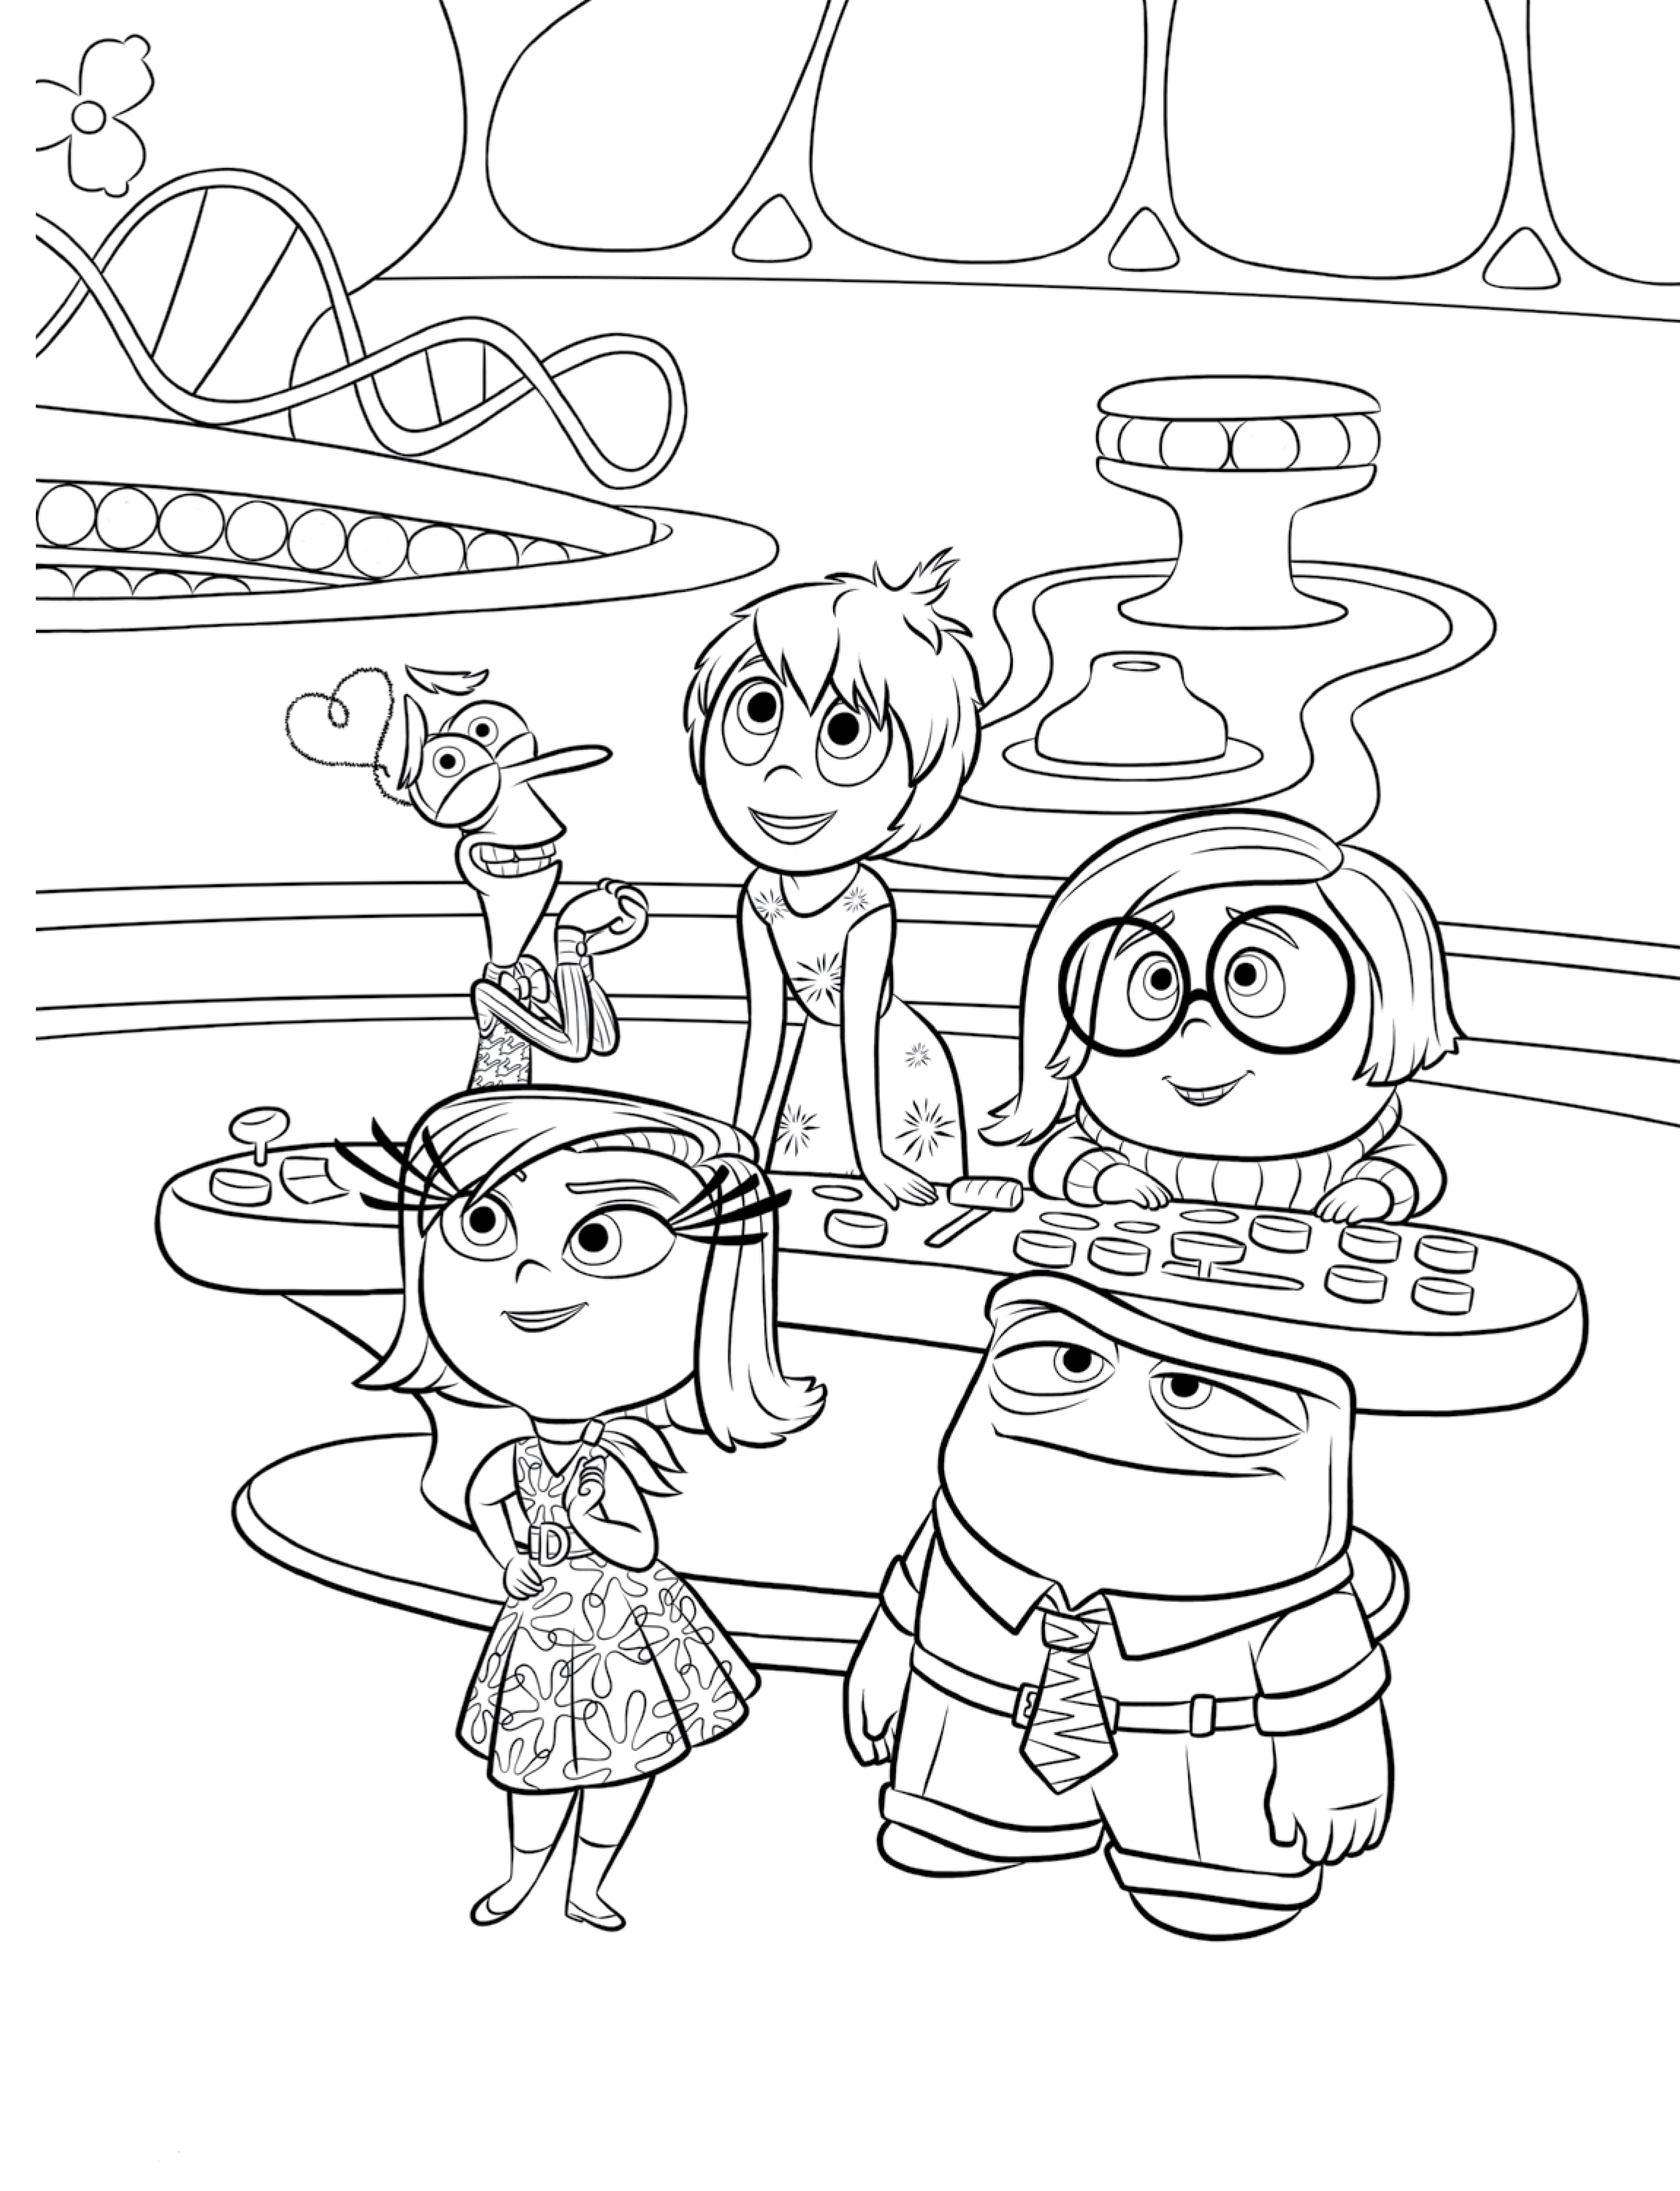   Disney Coloring Pages Inside Out  Latest HD